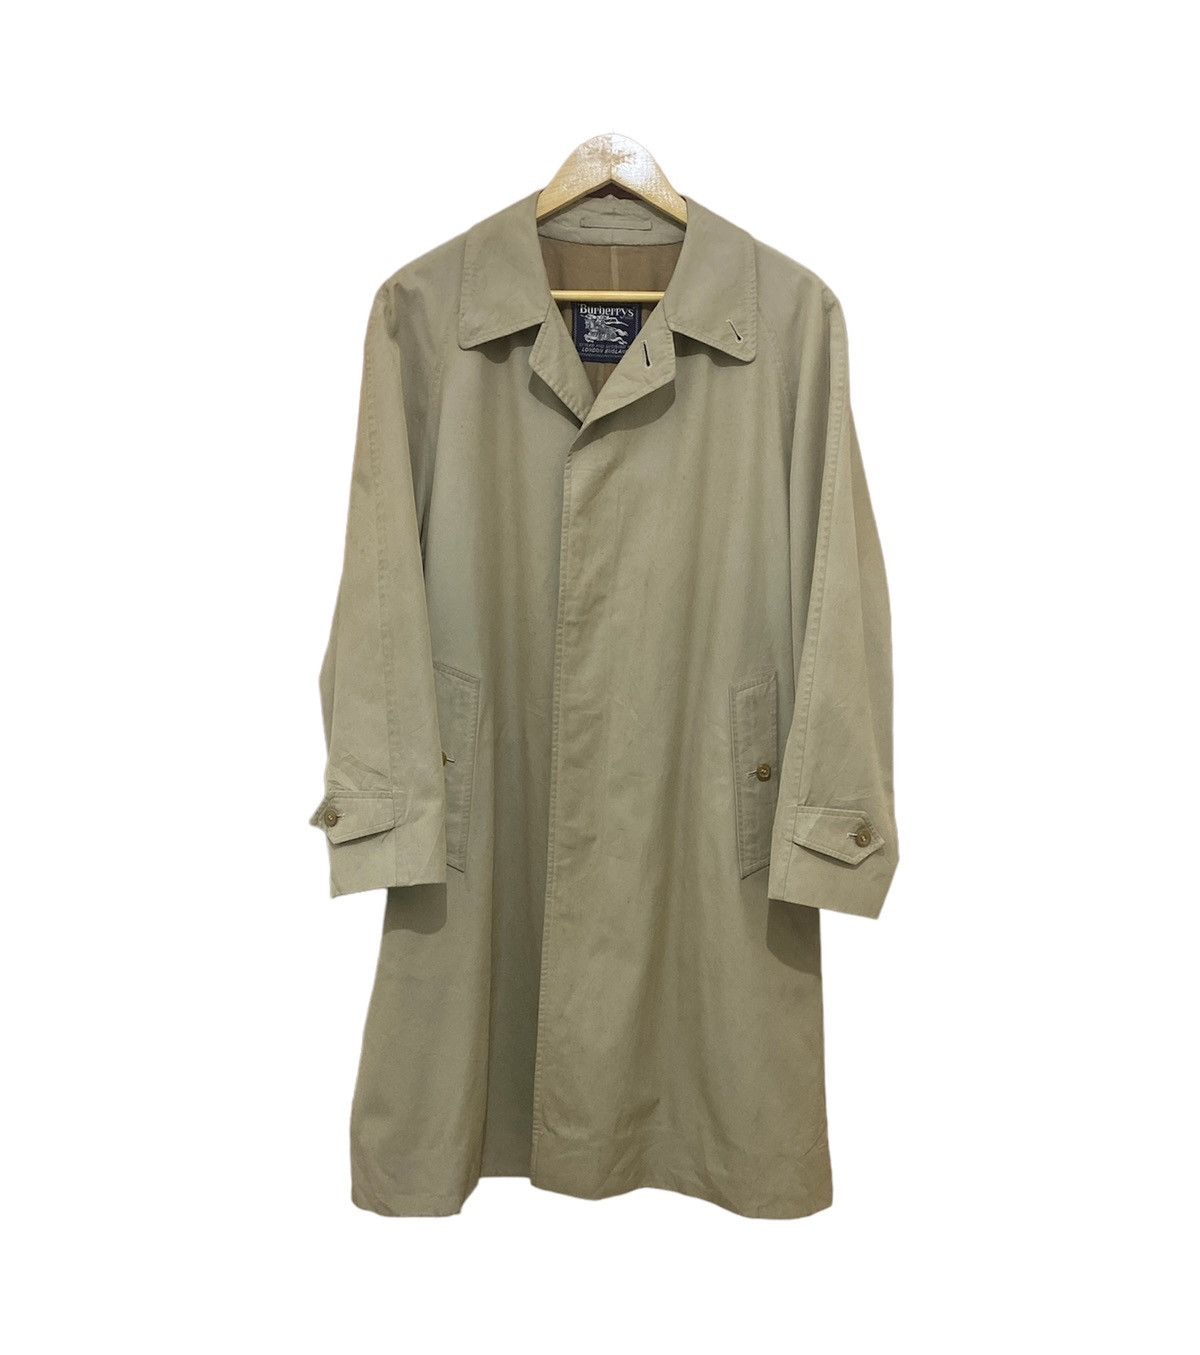 Vintage Classic Burberry Trench Coat - 1